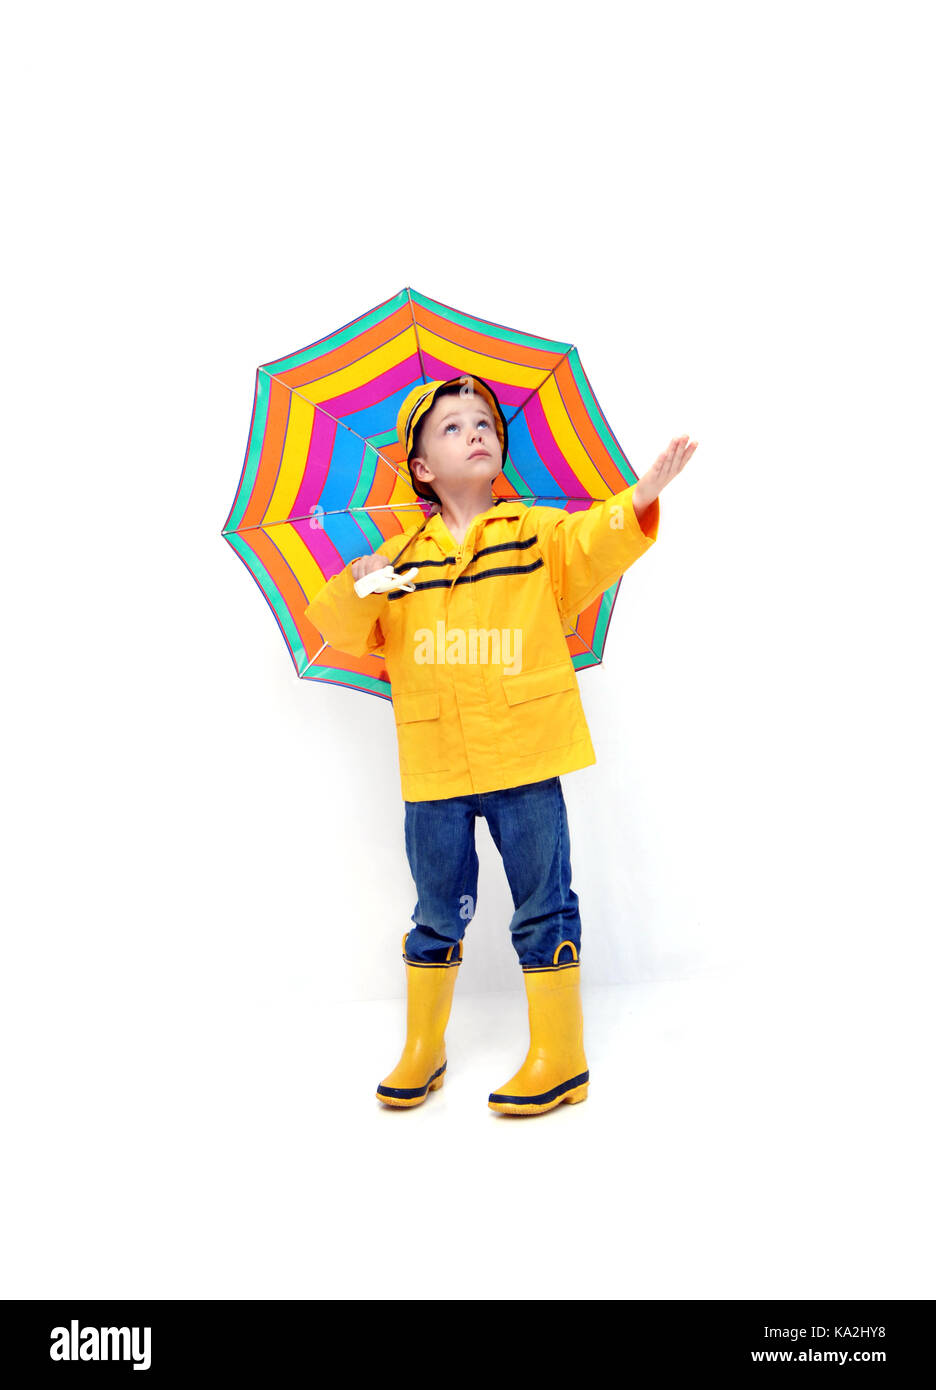 Young boy in yellow raincoat and rubber boots holds his hand out to check for rain.  He is holding a colorful striped umbrella. Stock Photo